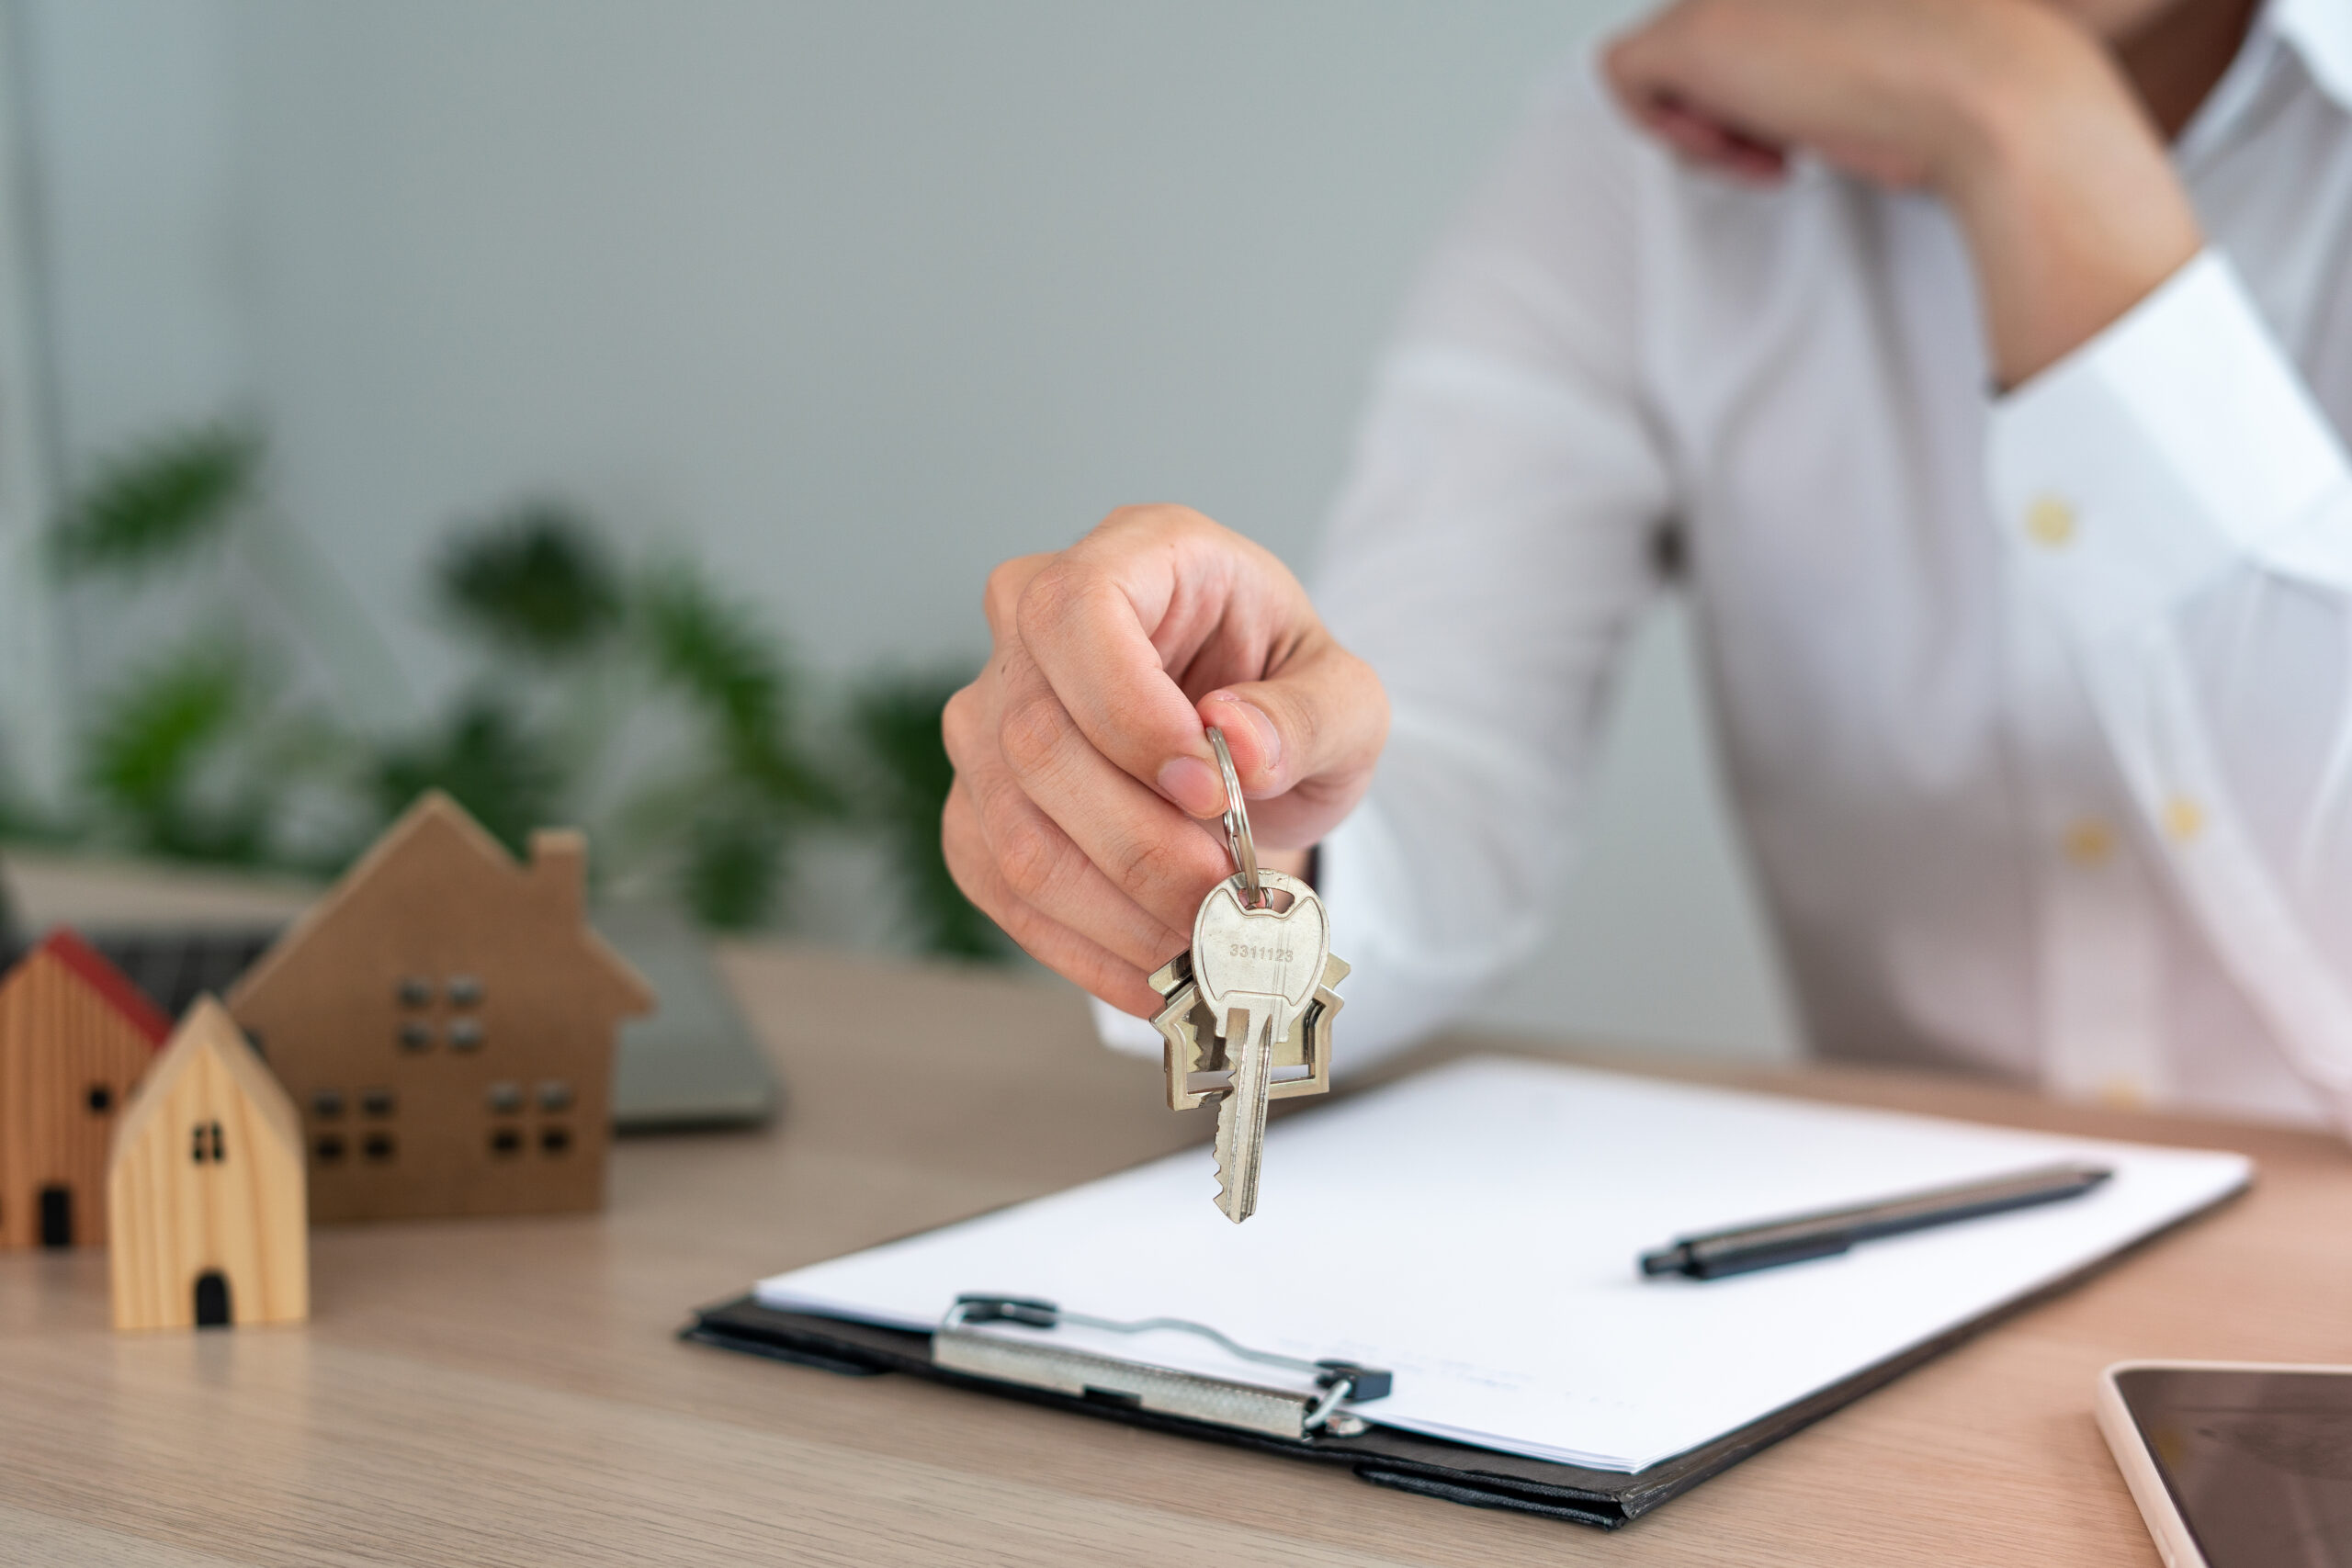 Risks of renting without background checks